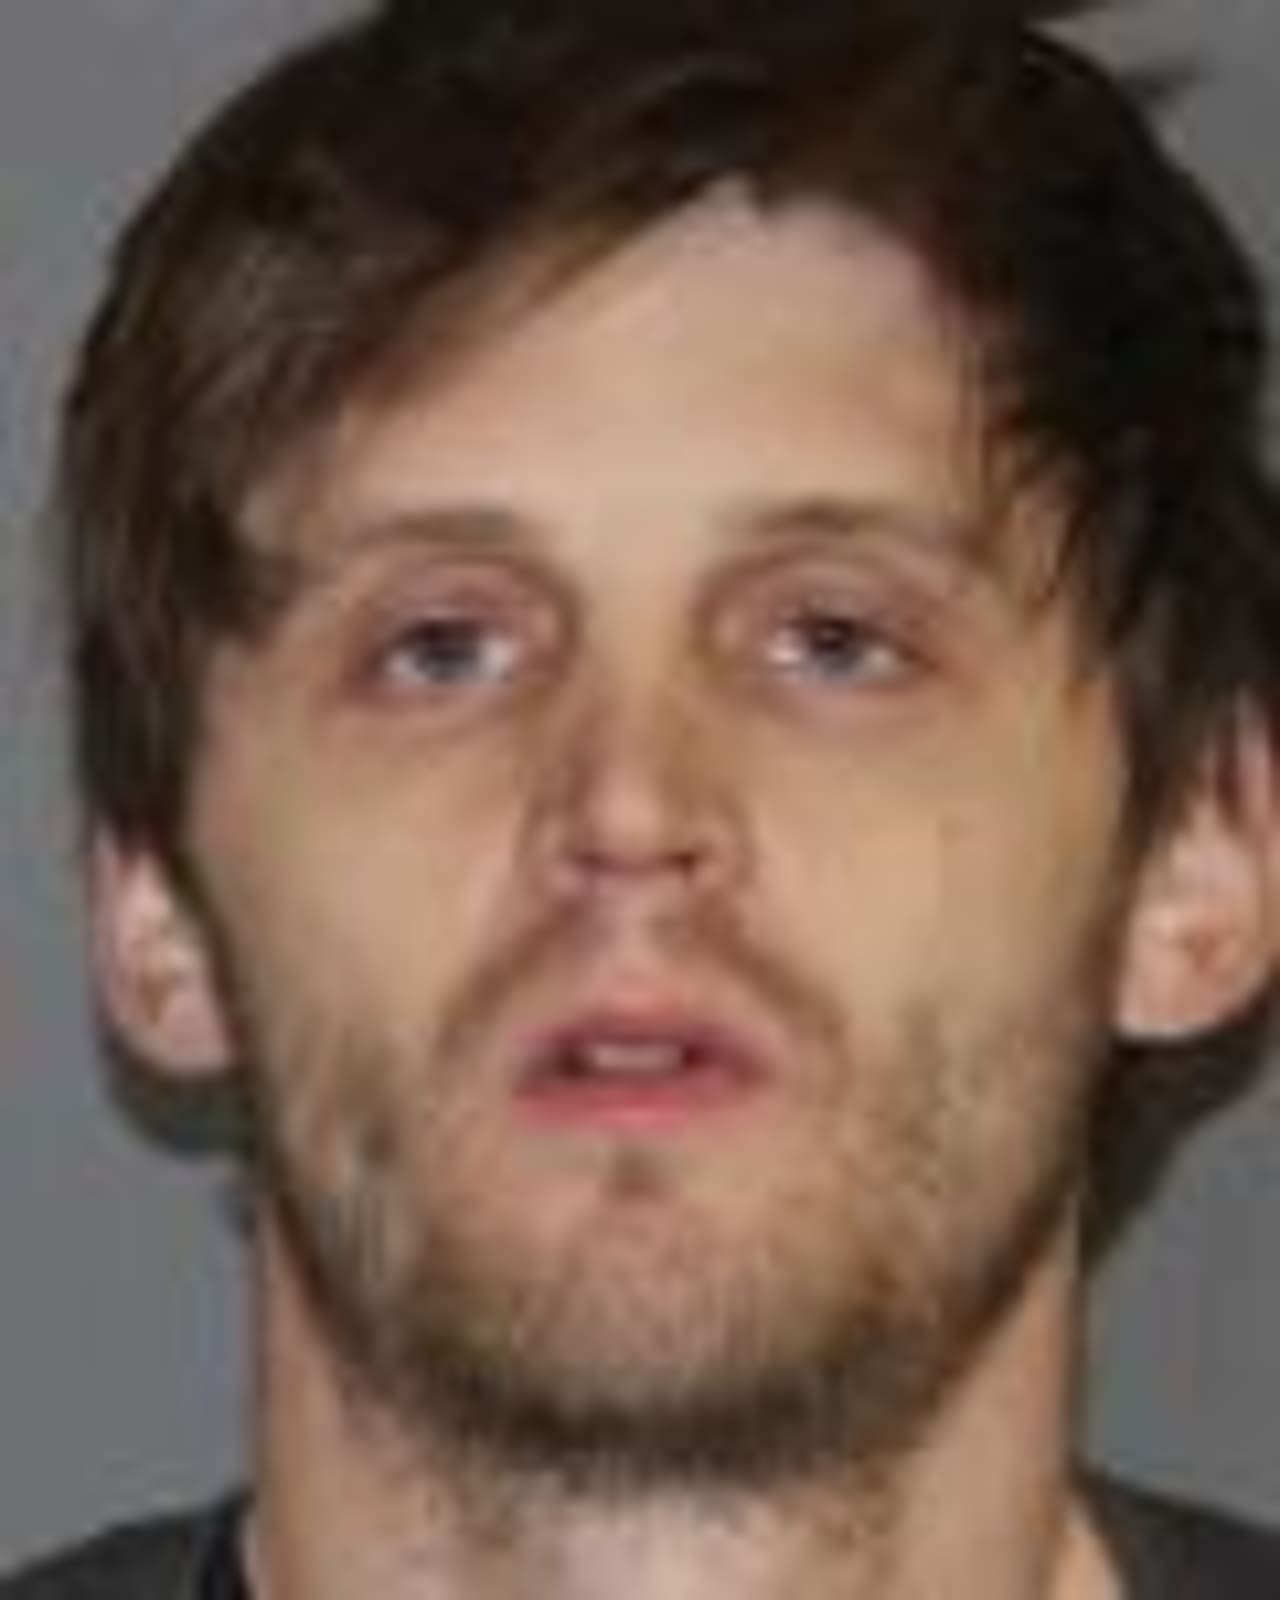 A Purdys man is facing multiple charges for robberies in Somers and North Salem.